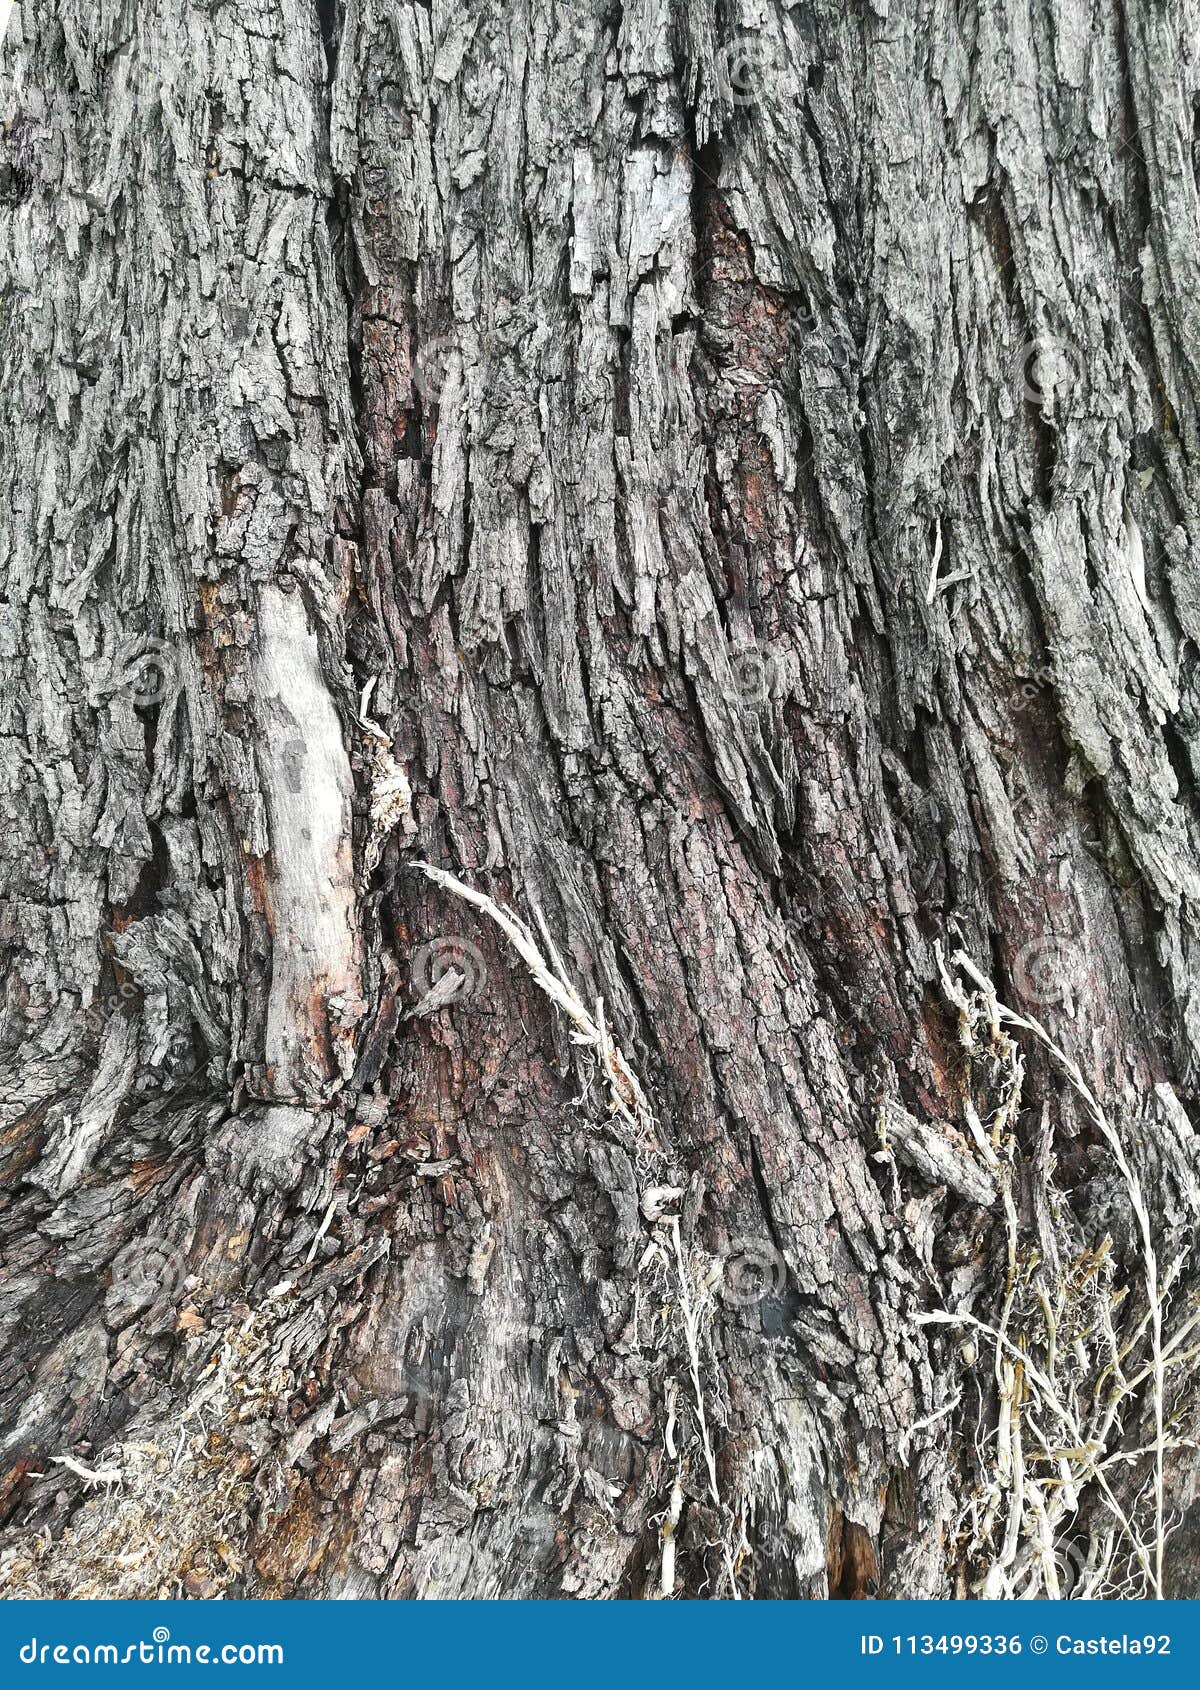 rough texture trunk tree